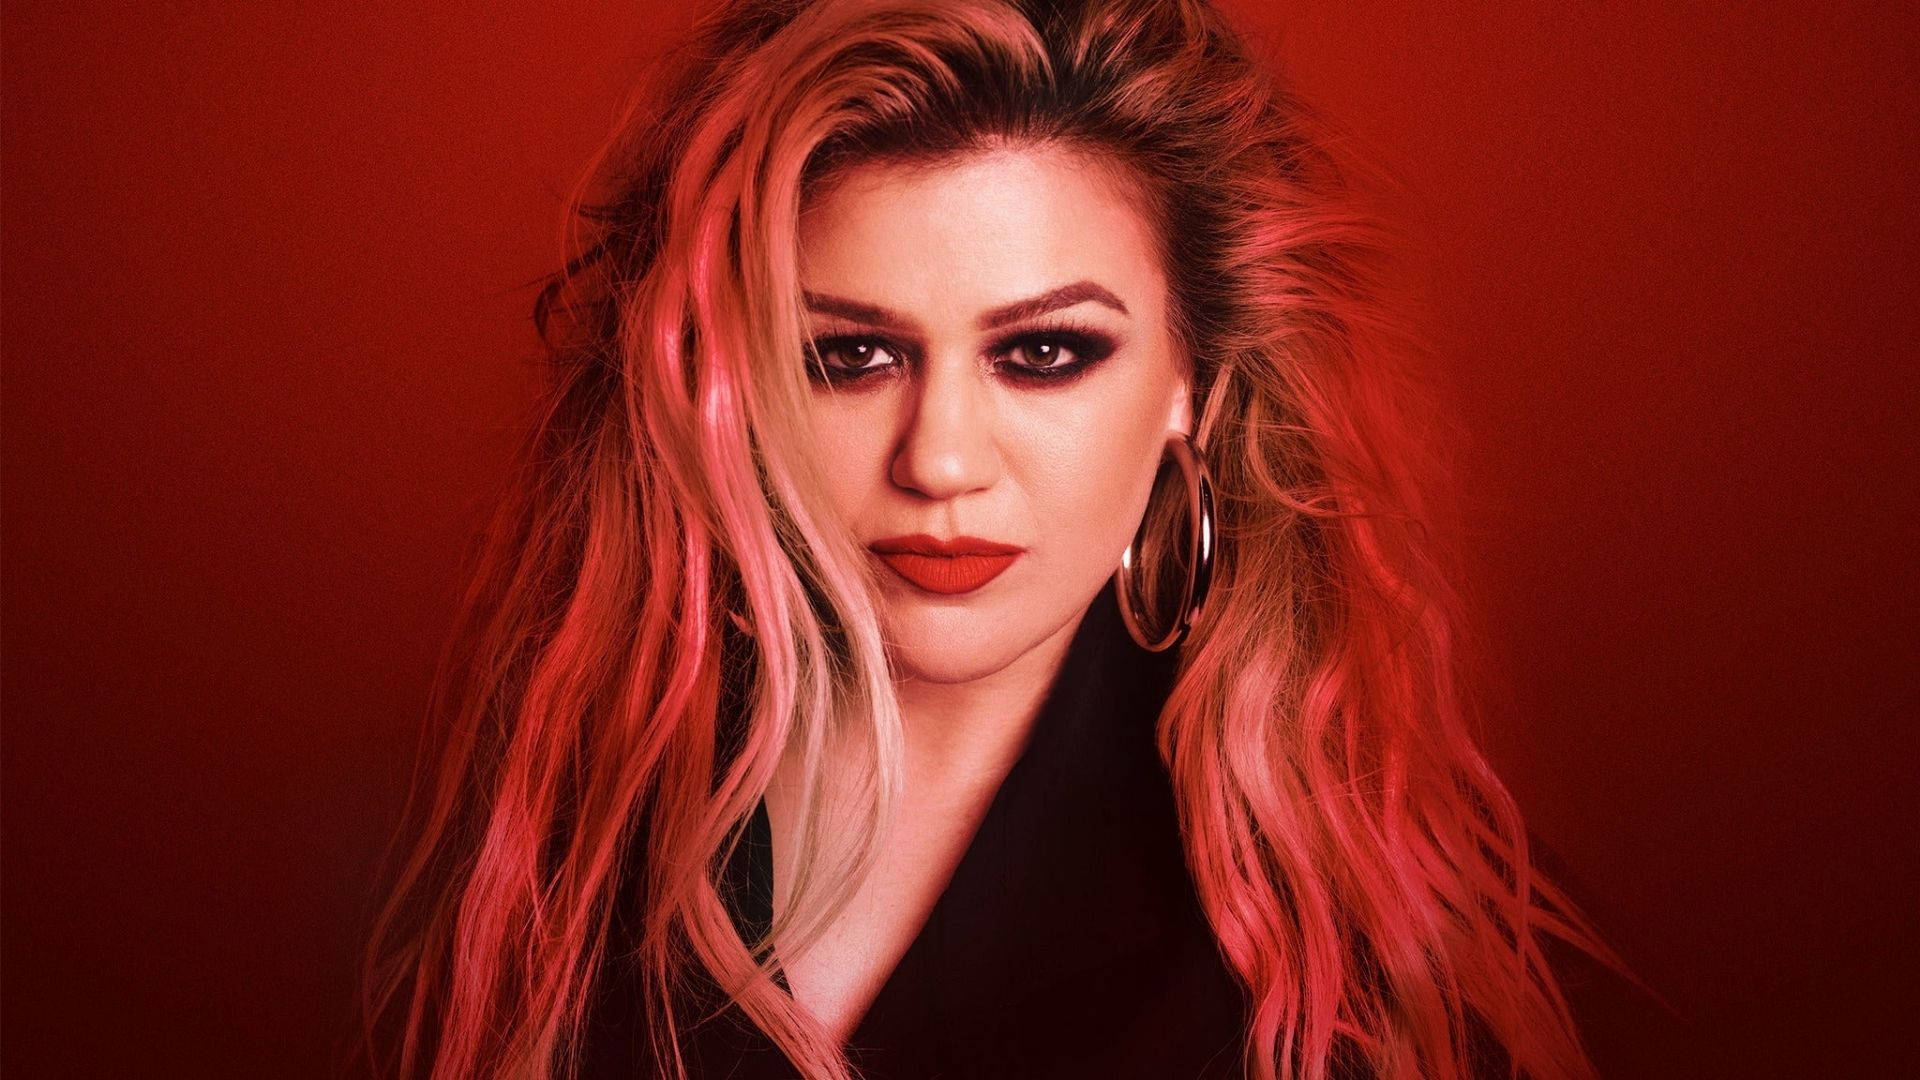 Stunning Portrait Of Kelly Clarkson In Vibrant Red Dress